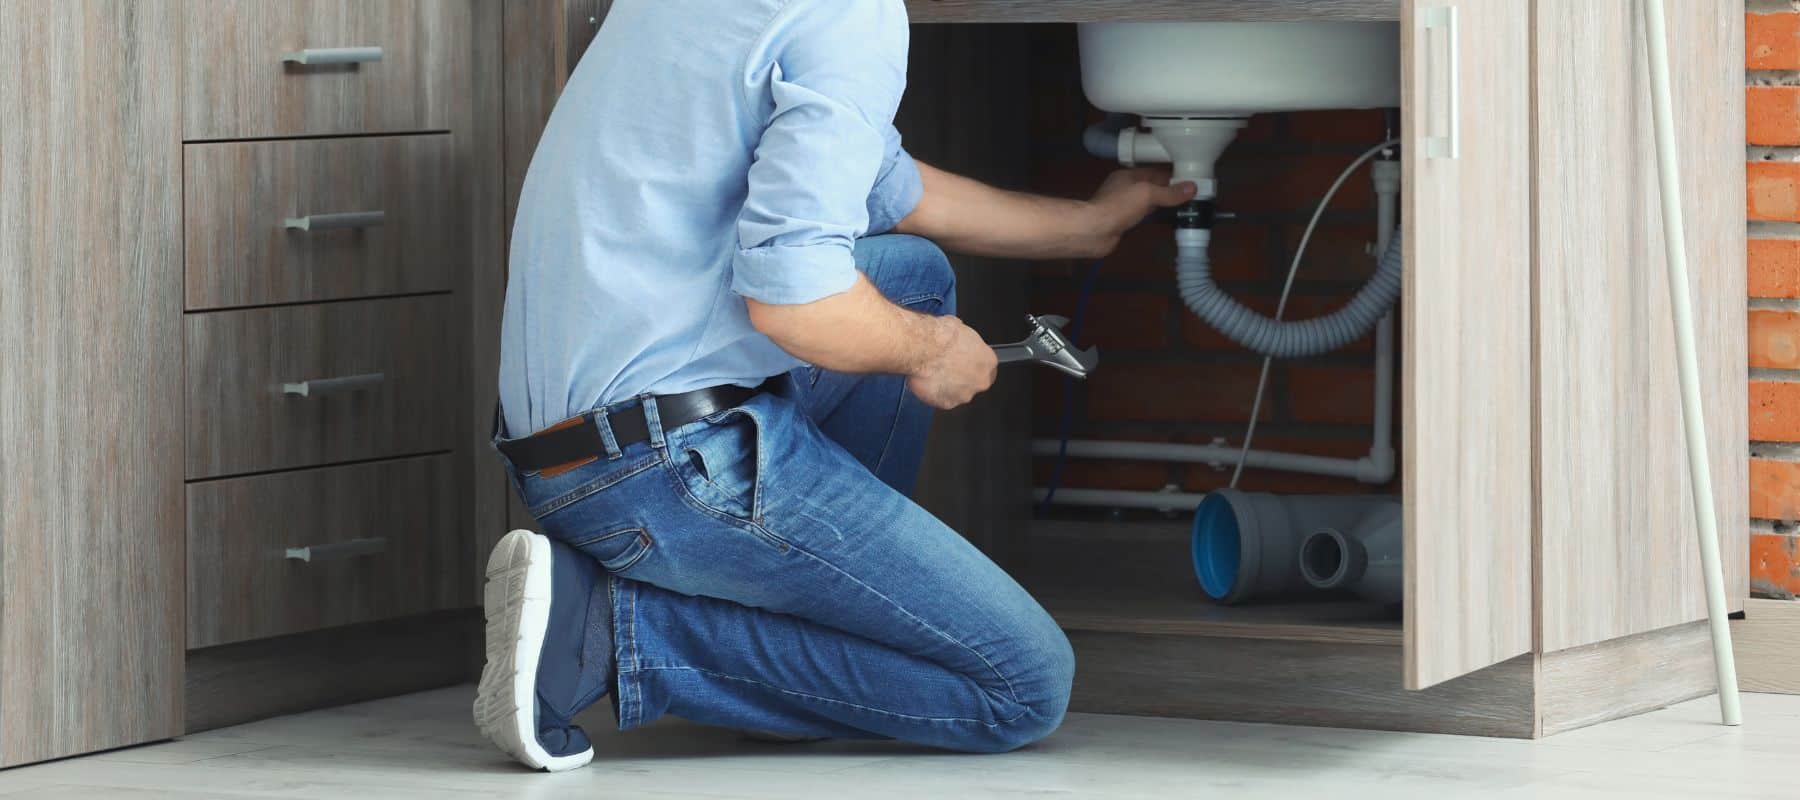 homeowner bending down in front of a bathroom sink holding a wrench to tighten a section of piping on the sink